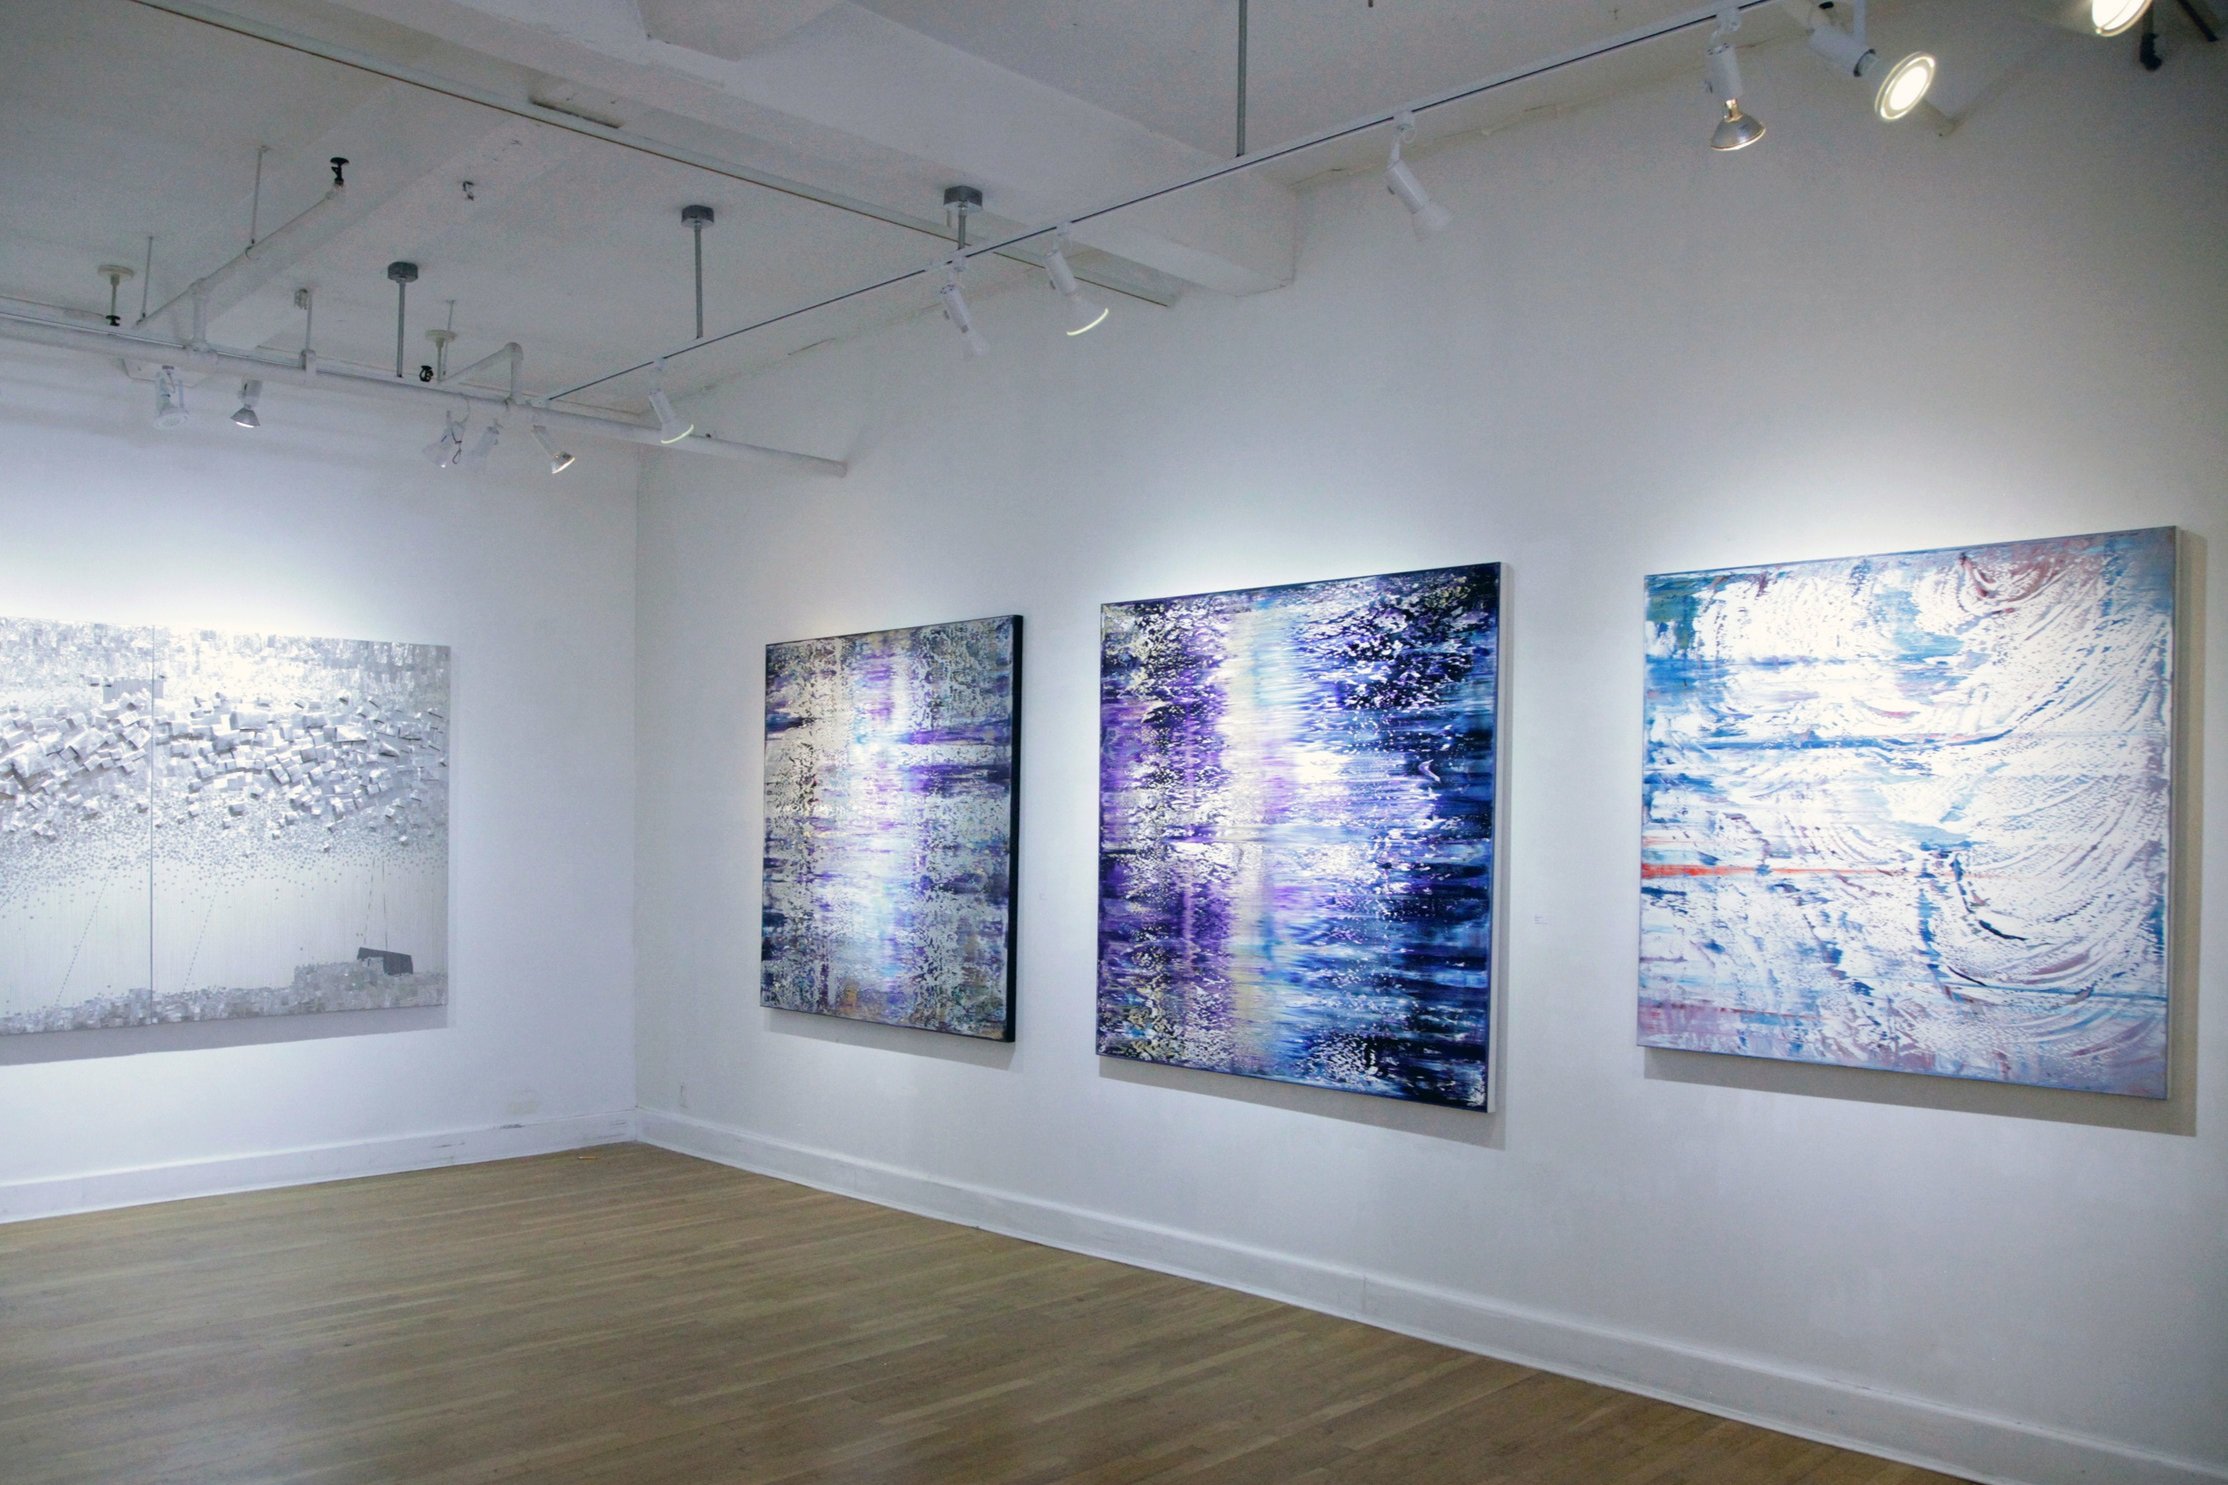  Donghwa Ode Gallery Spring Benefit Exhibition New York, U.S.A.  